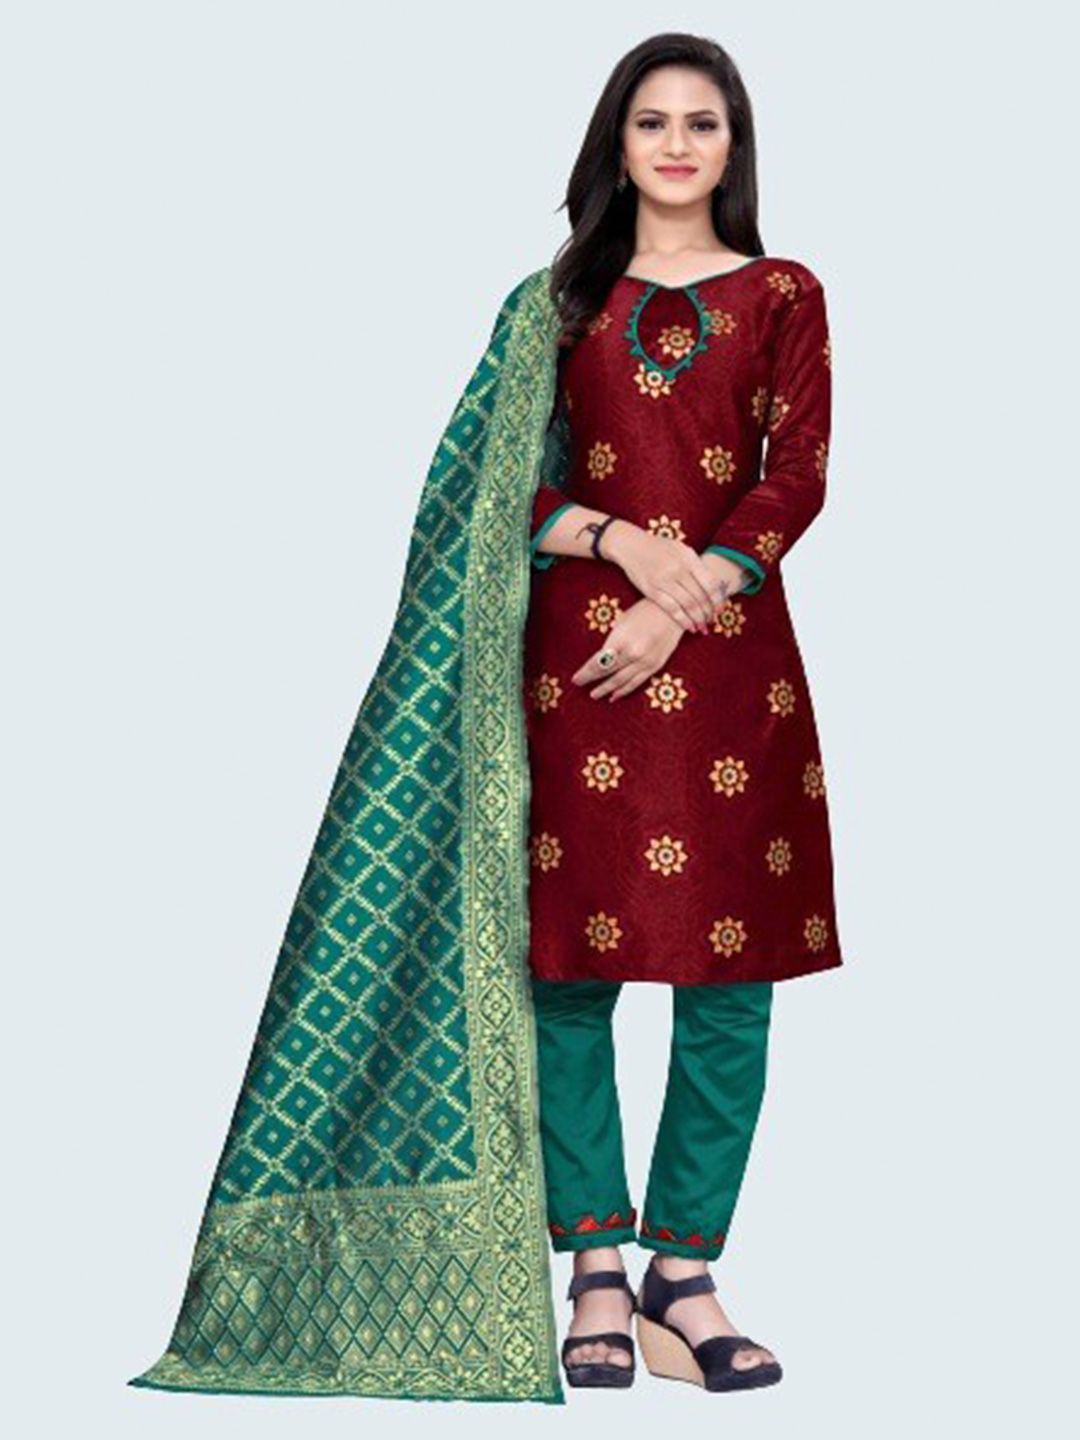 MORLY Women Maroon & Teal Dupion Silk Unstitched Dress Material Price in India